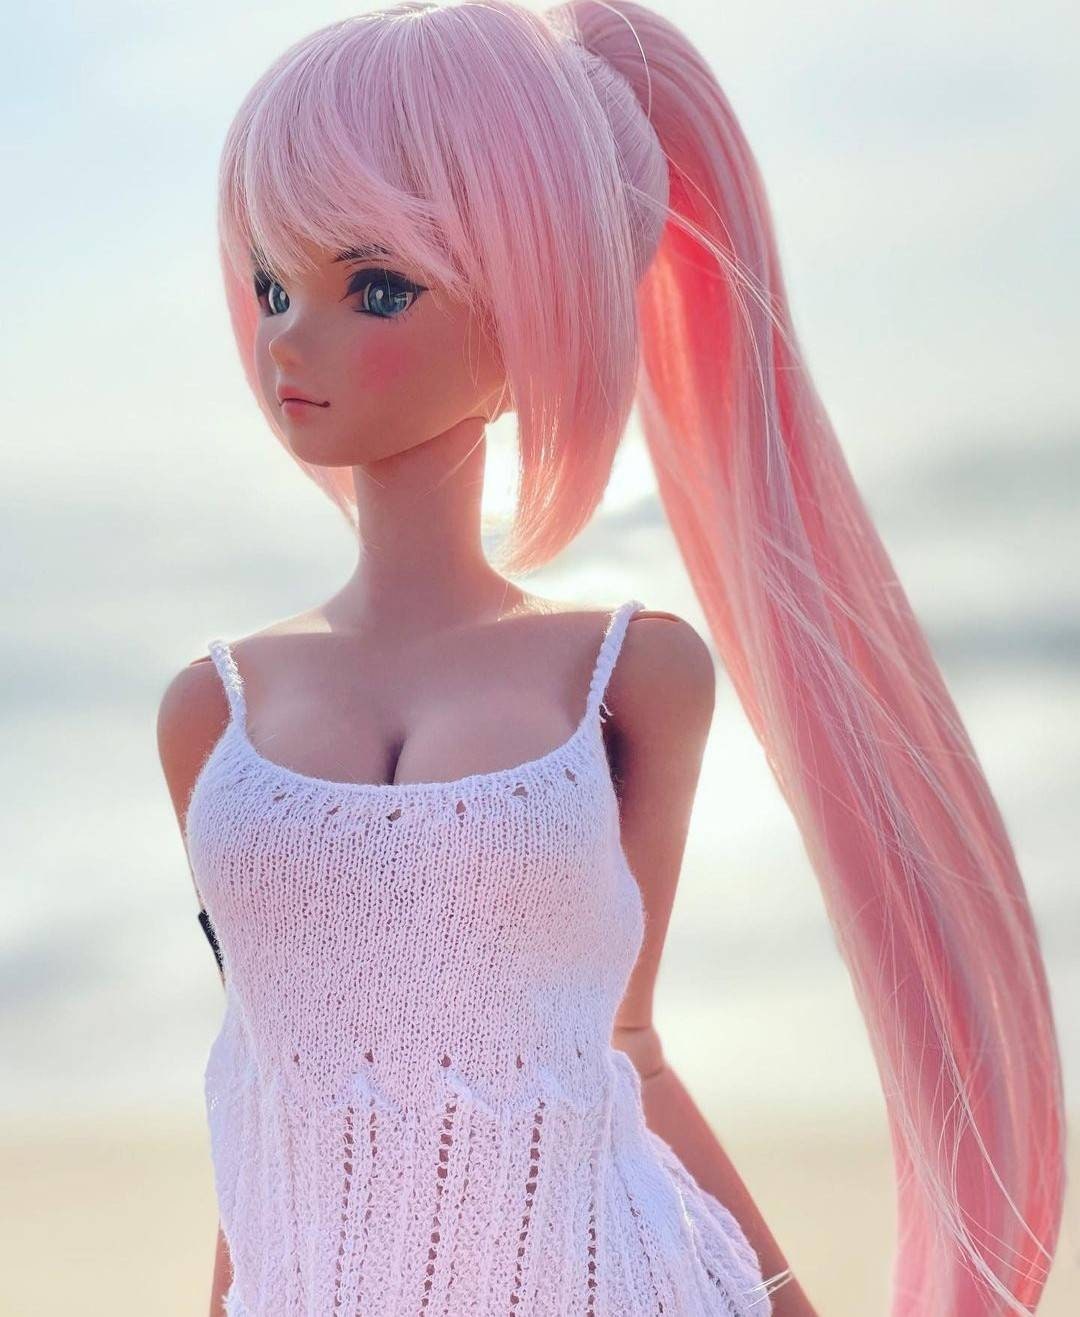 Custom doll WIG for Smart Dolls- Heat Safe - Tangle Resistant- 8" head size of Bjd, SD, Dollfie Dream dolls Pink Tan Cap  anime Limited